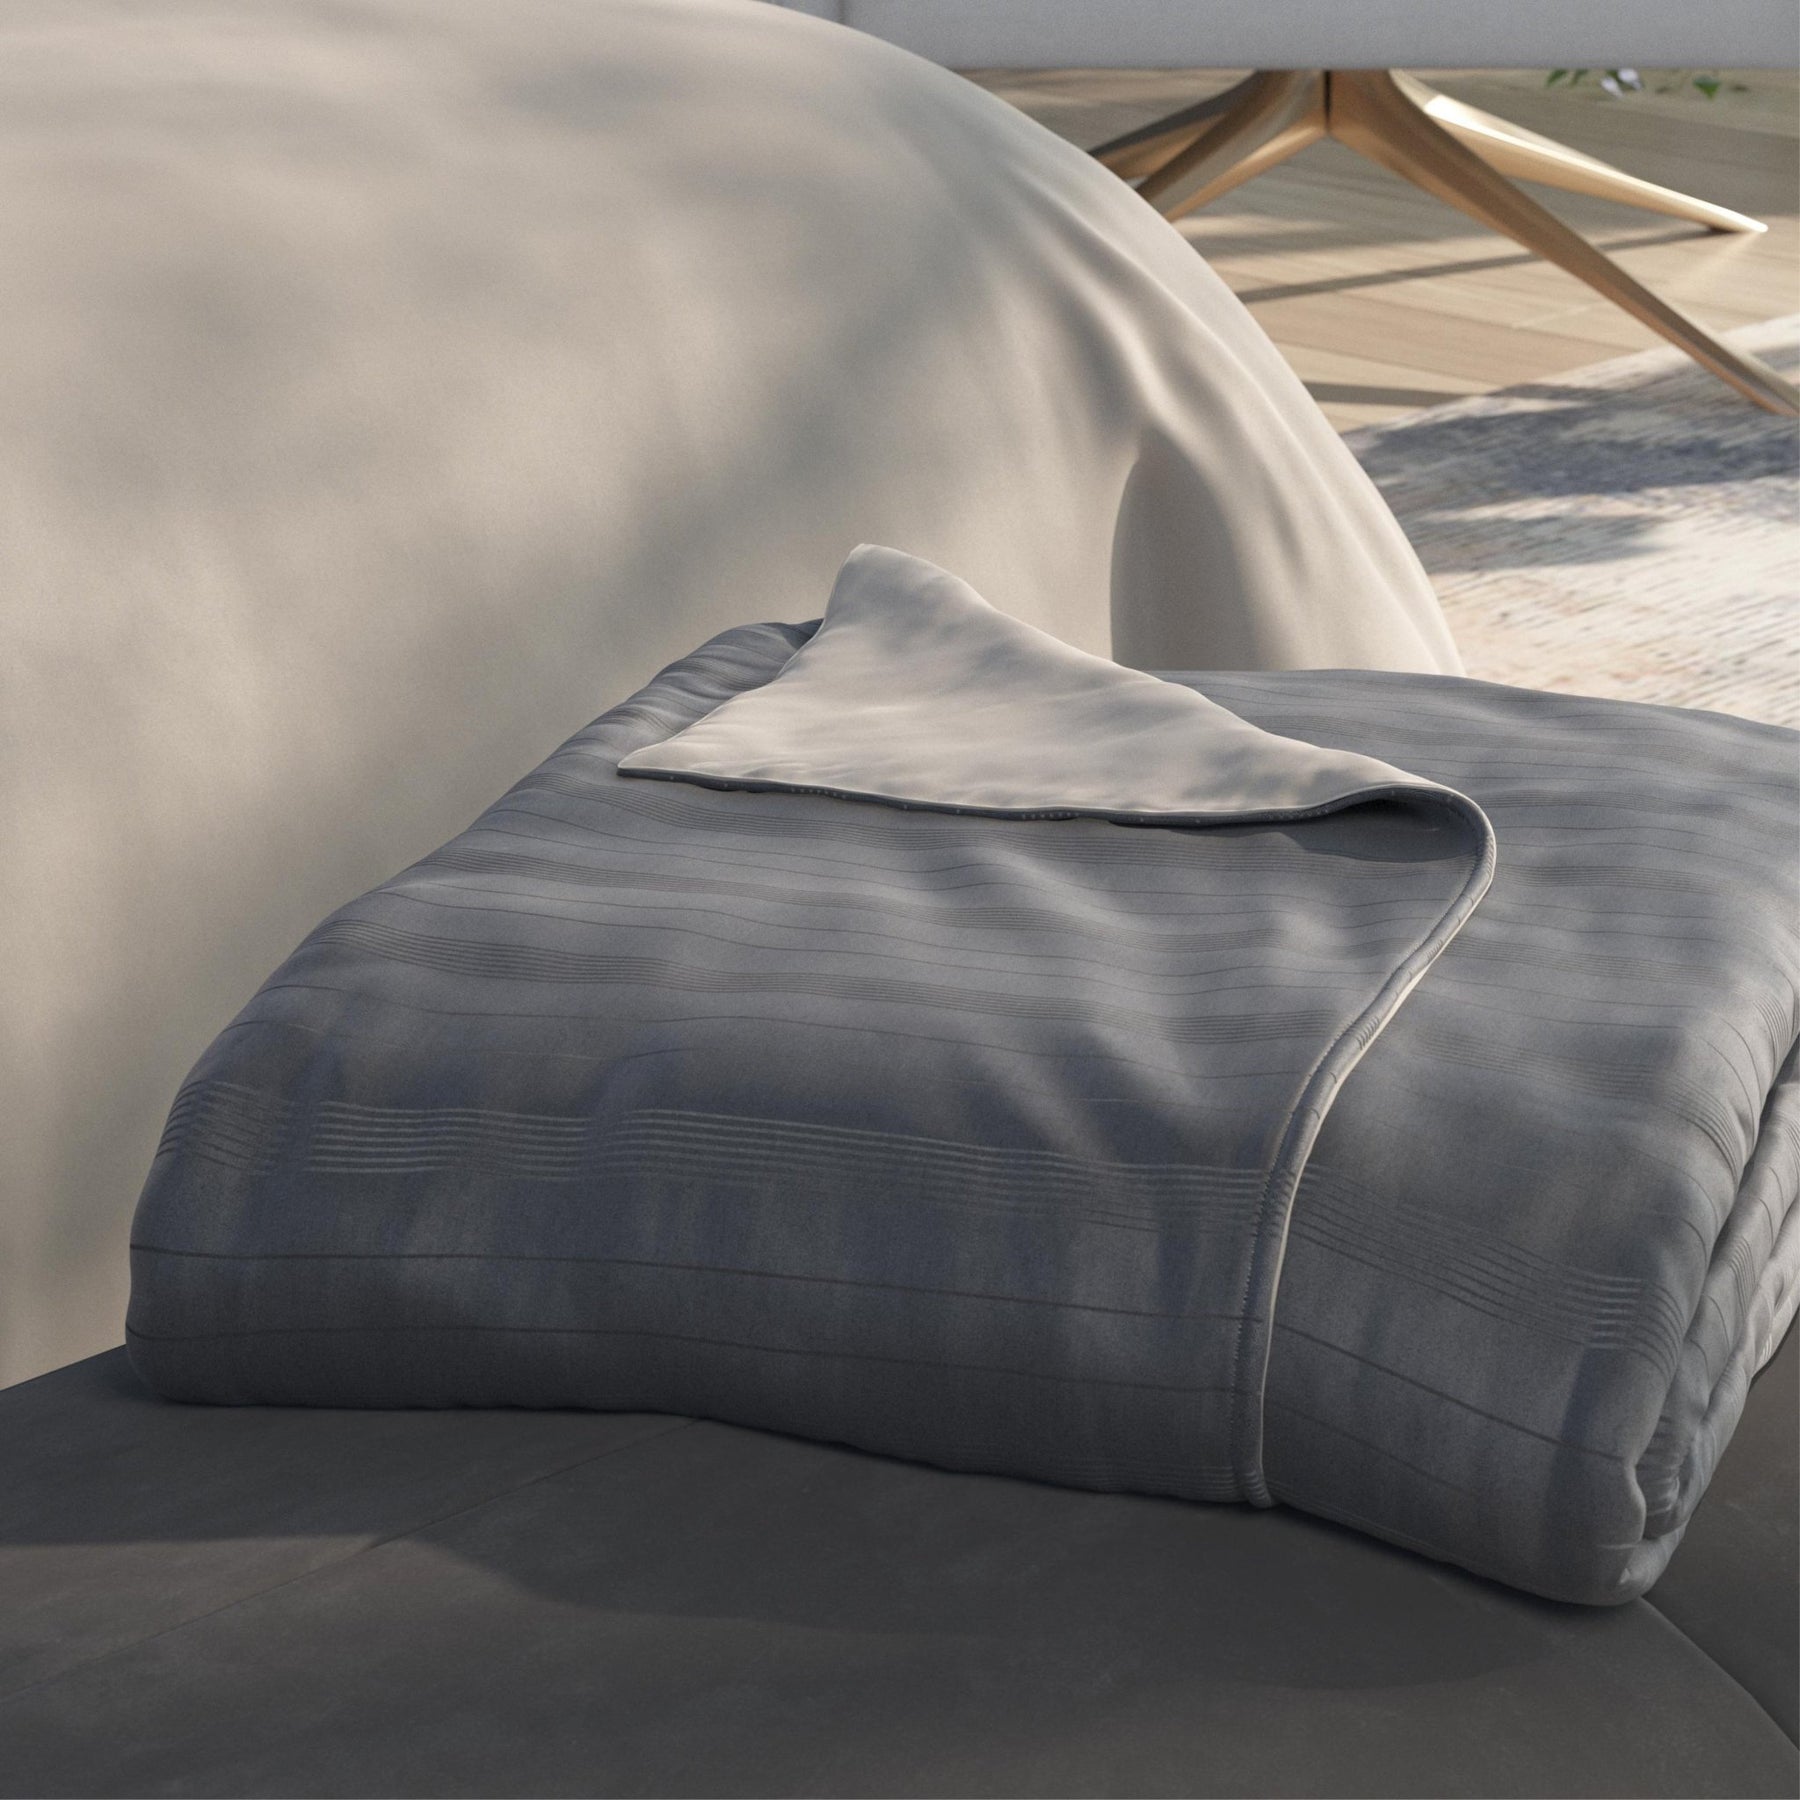 Image of a neatly folded Shadow/Dove Gray Duvet Cover + Cooling with the Shadow side facing up and a corner of the Dove Gray side folded back on a gray stool at the foot of a bed